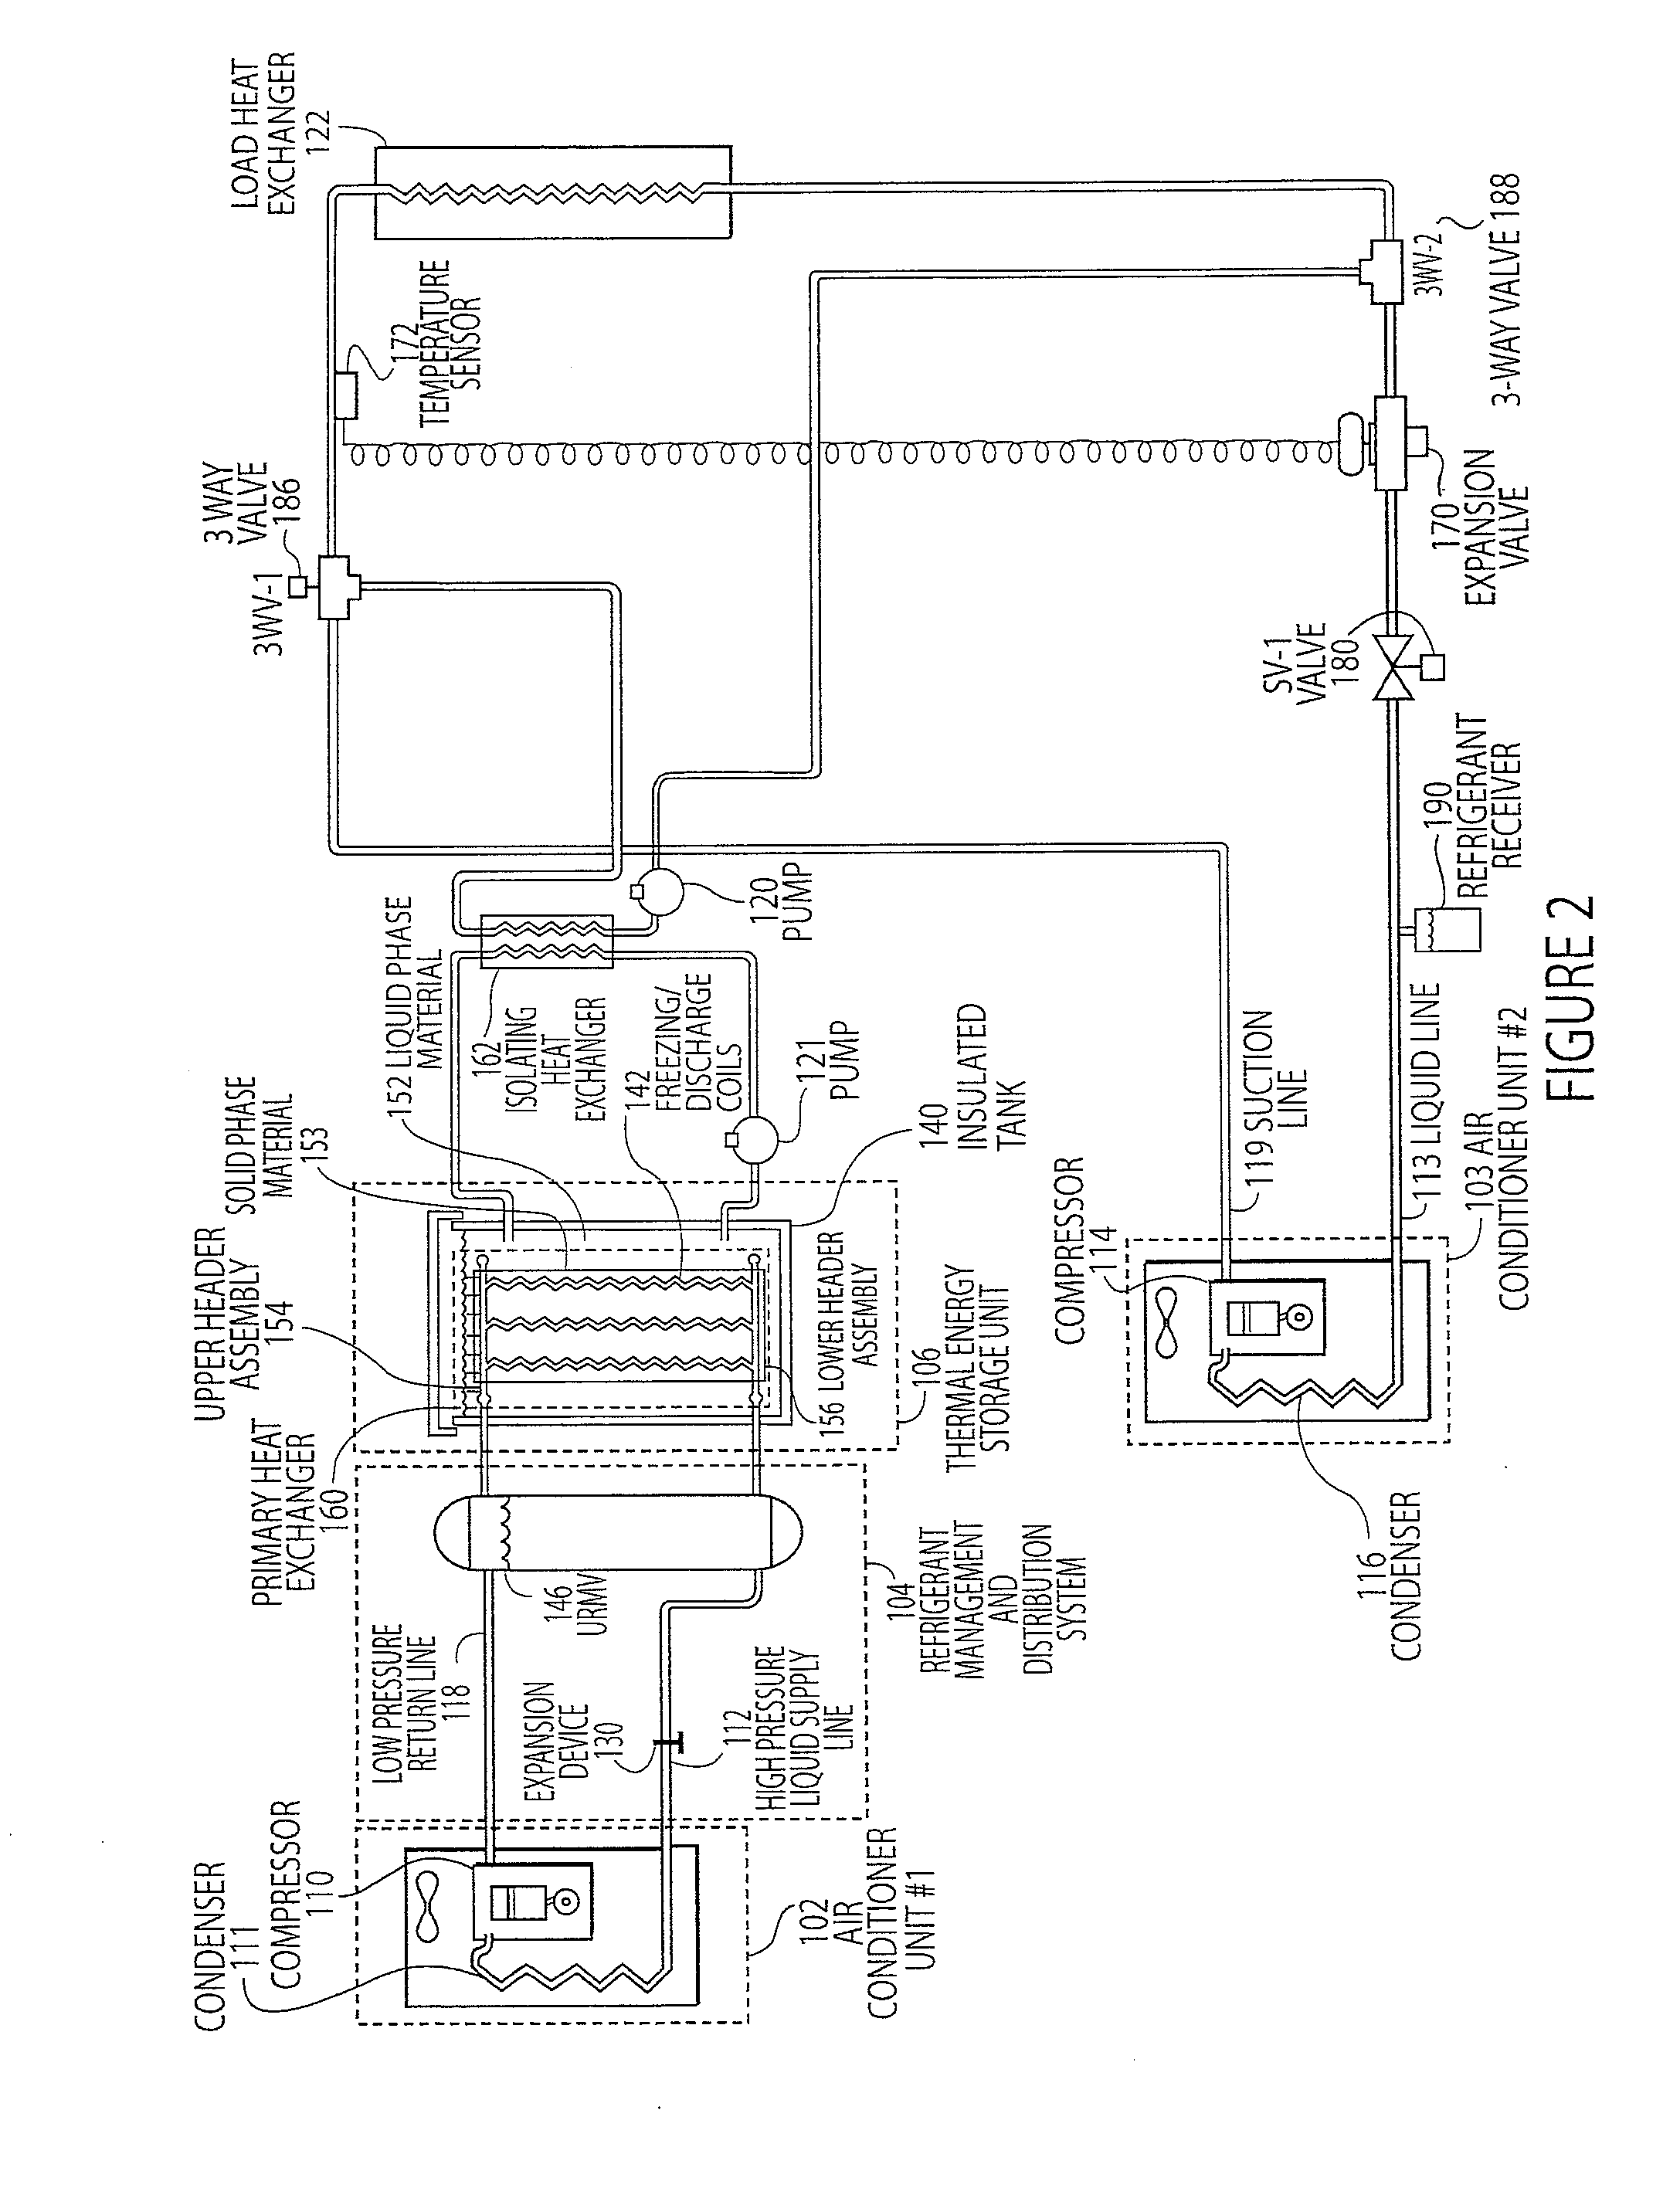 Thermal energy storage and cooling system utilizing multiple refrigerant and cooling loops with a common evaporator coil